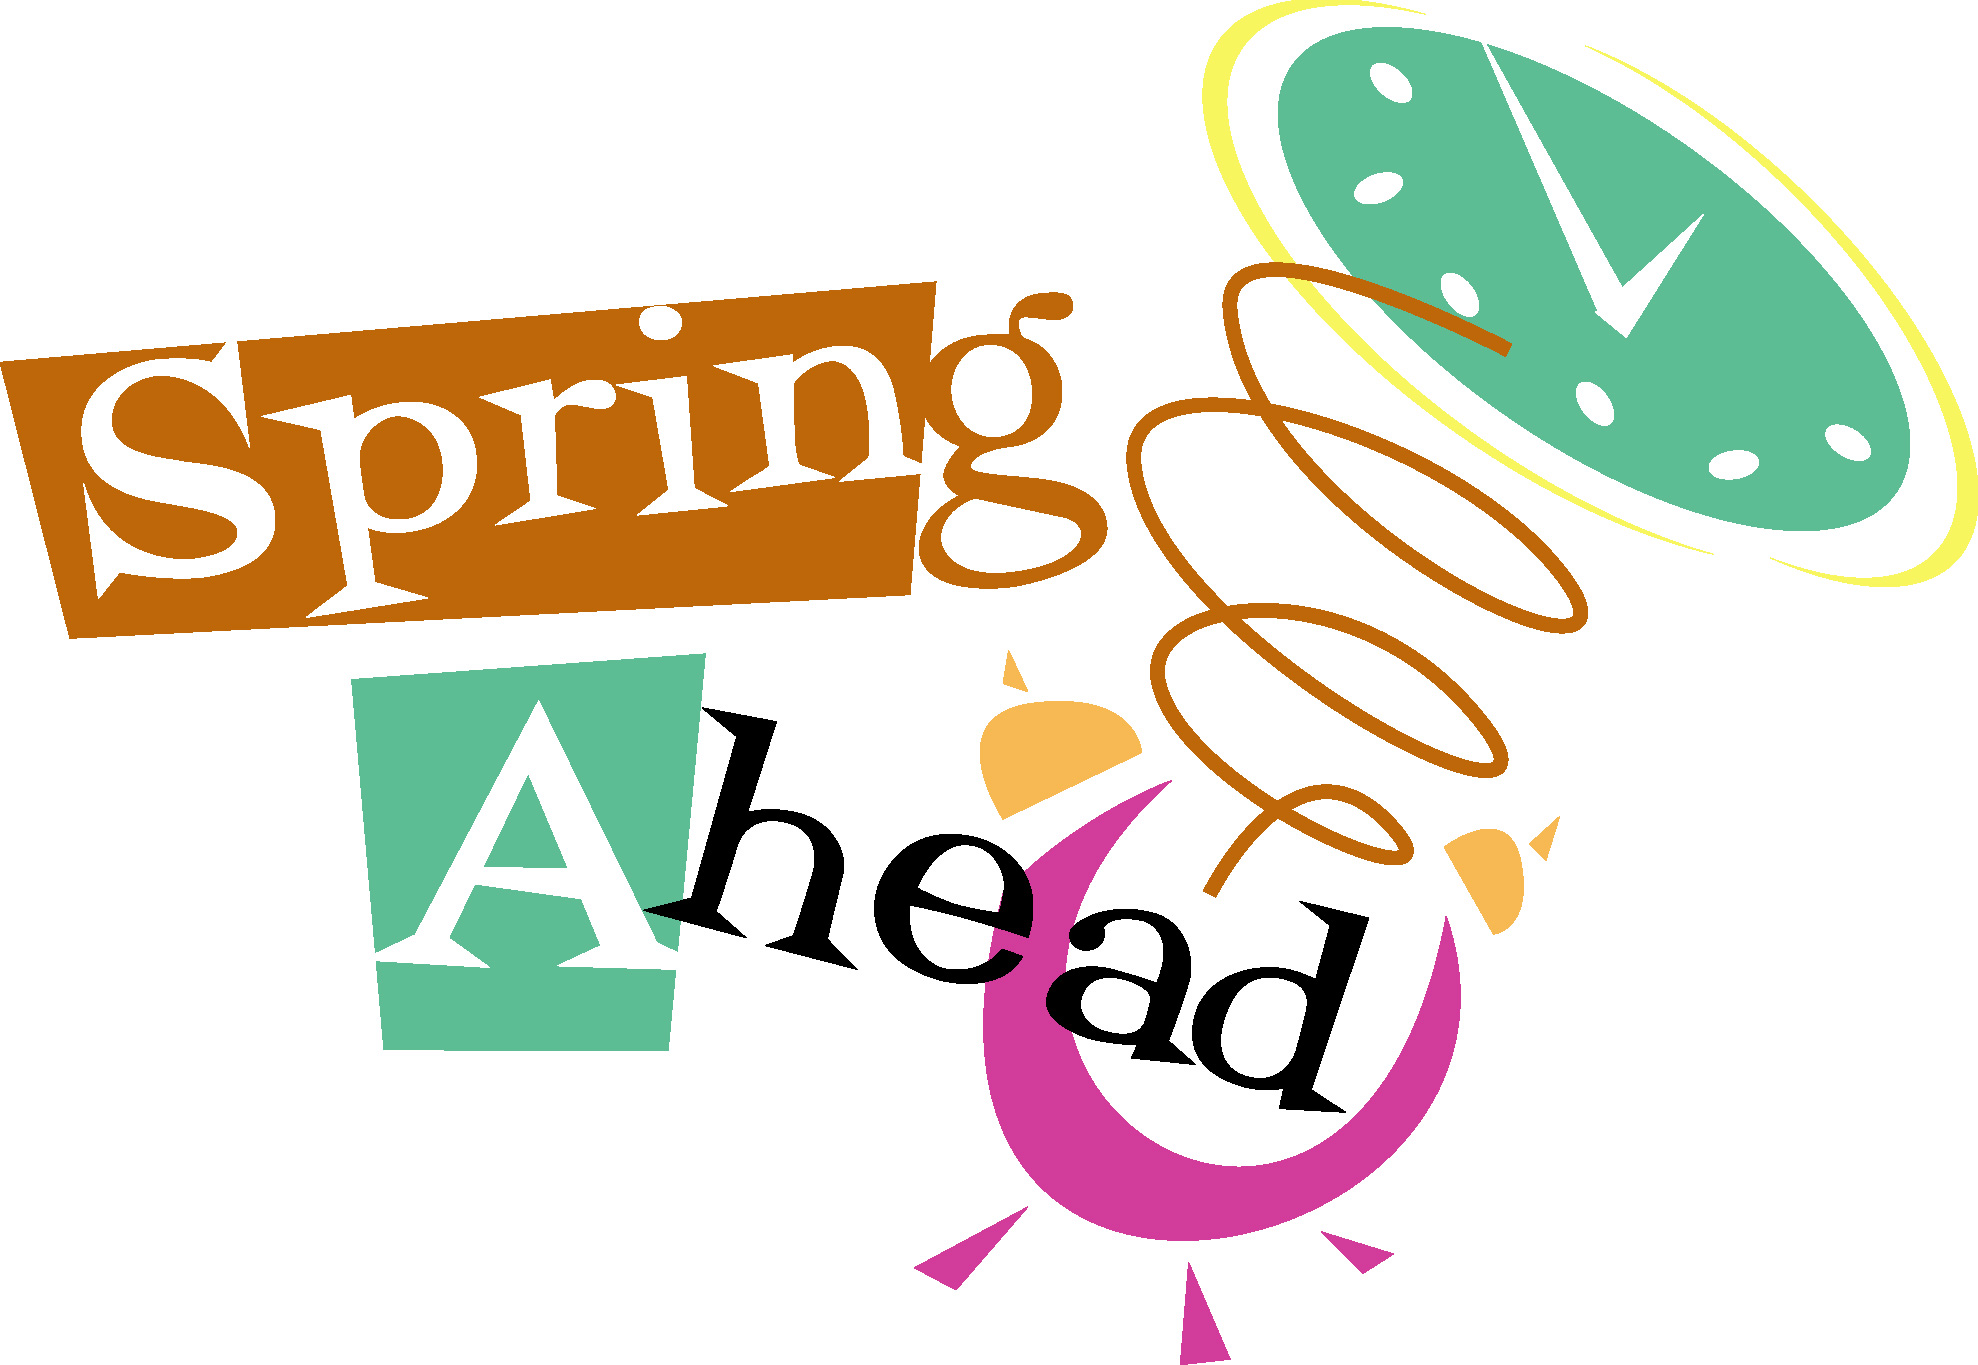 Spring Ahead - ClipArt Best